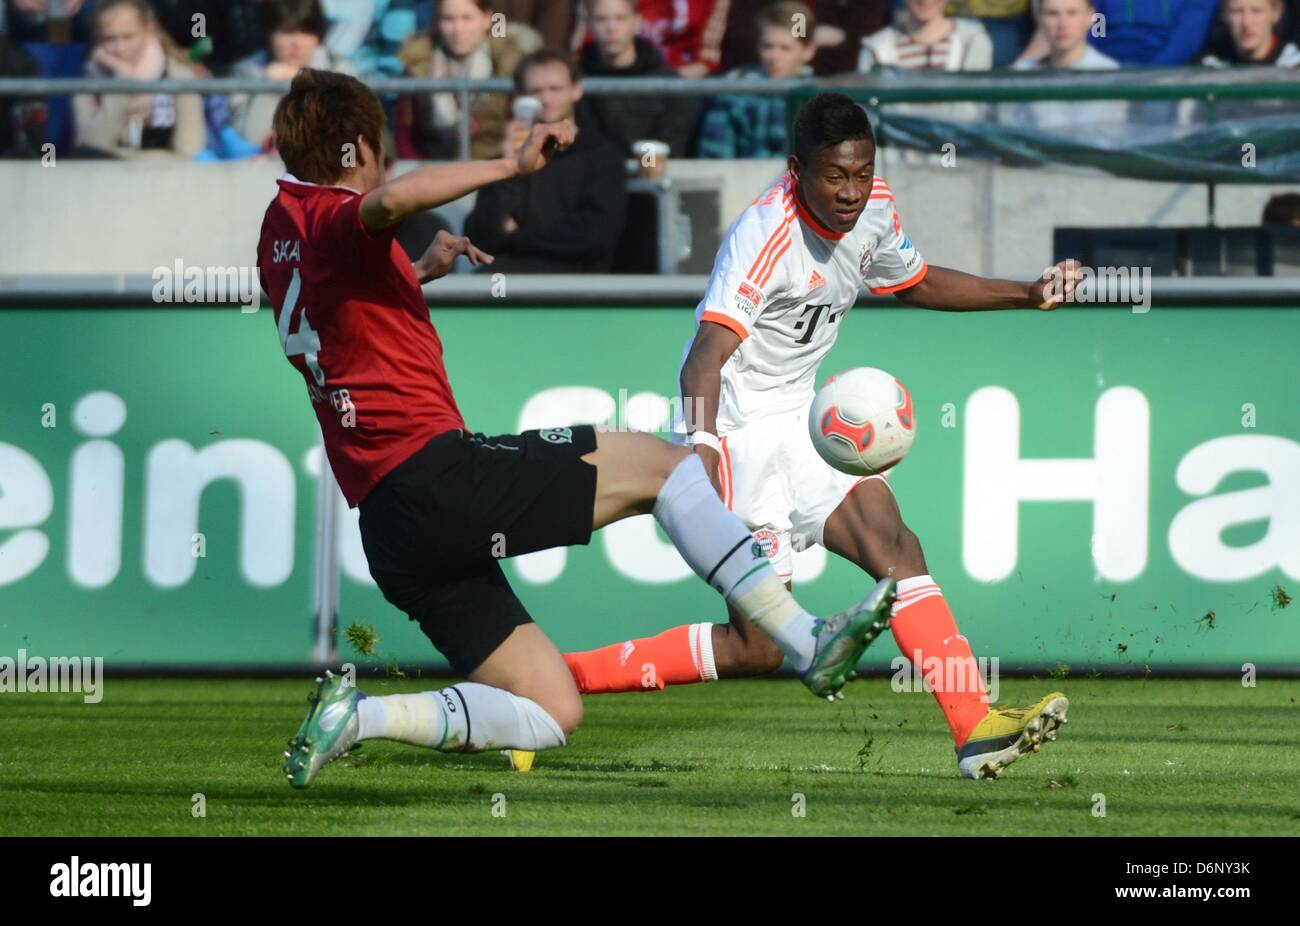 Hanover's Hiroki Sakai (L) vies for the ball with Munich's David Alaba during the Bundesliga soccer match between Hanover 96 and FC Bayern Munich at AWD Arena in Hanover, Germany, 20 April 2013. Munich won the match 1-6. Photo: Julian Stratenschulte Stock Photo